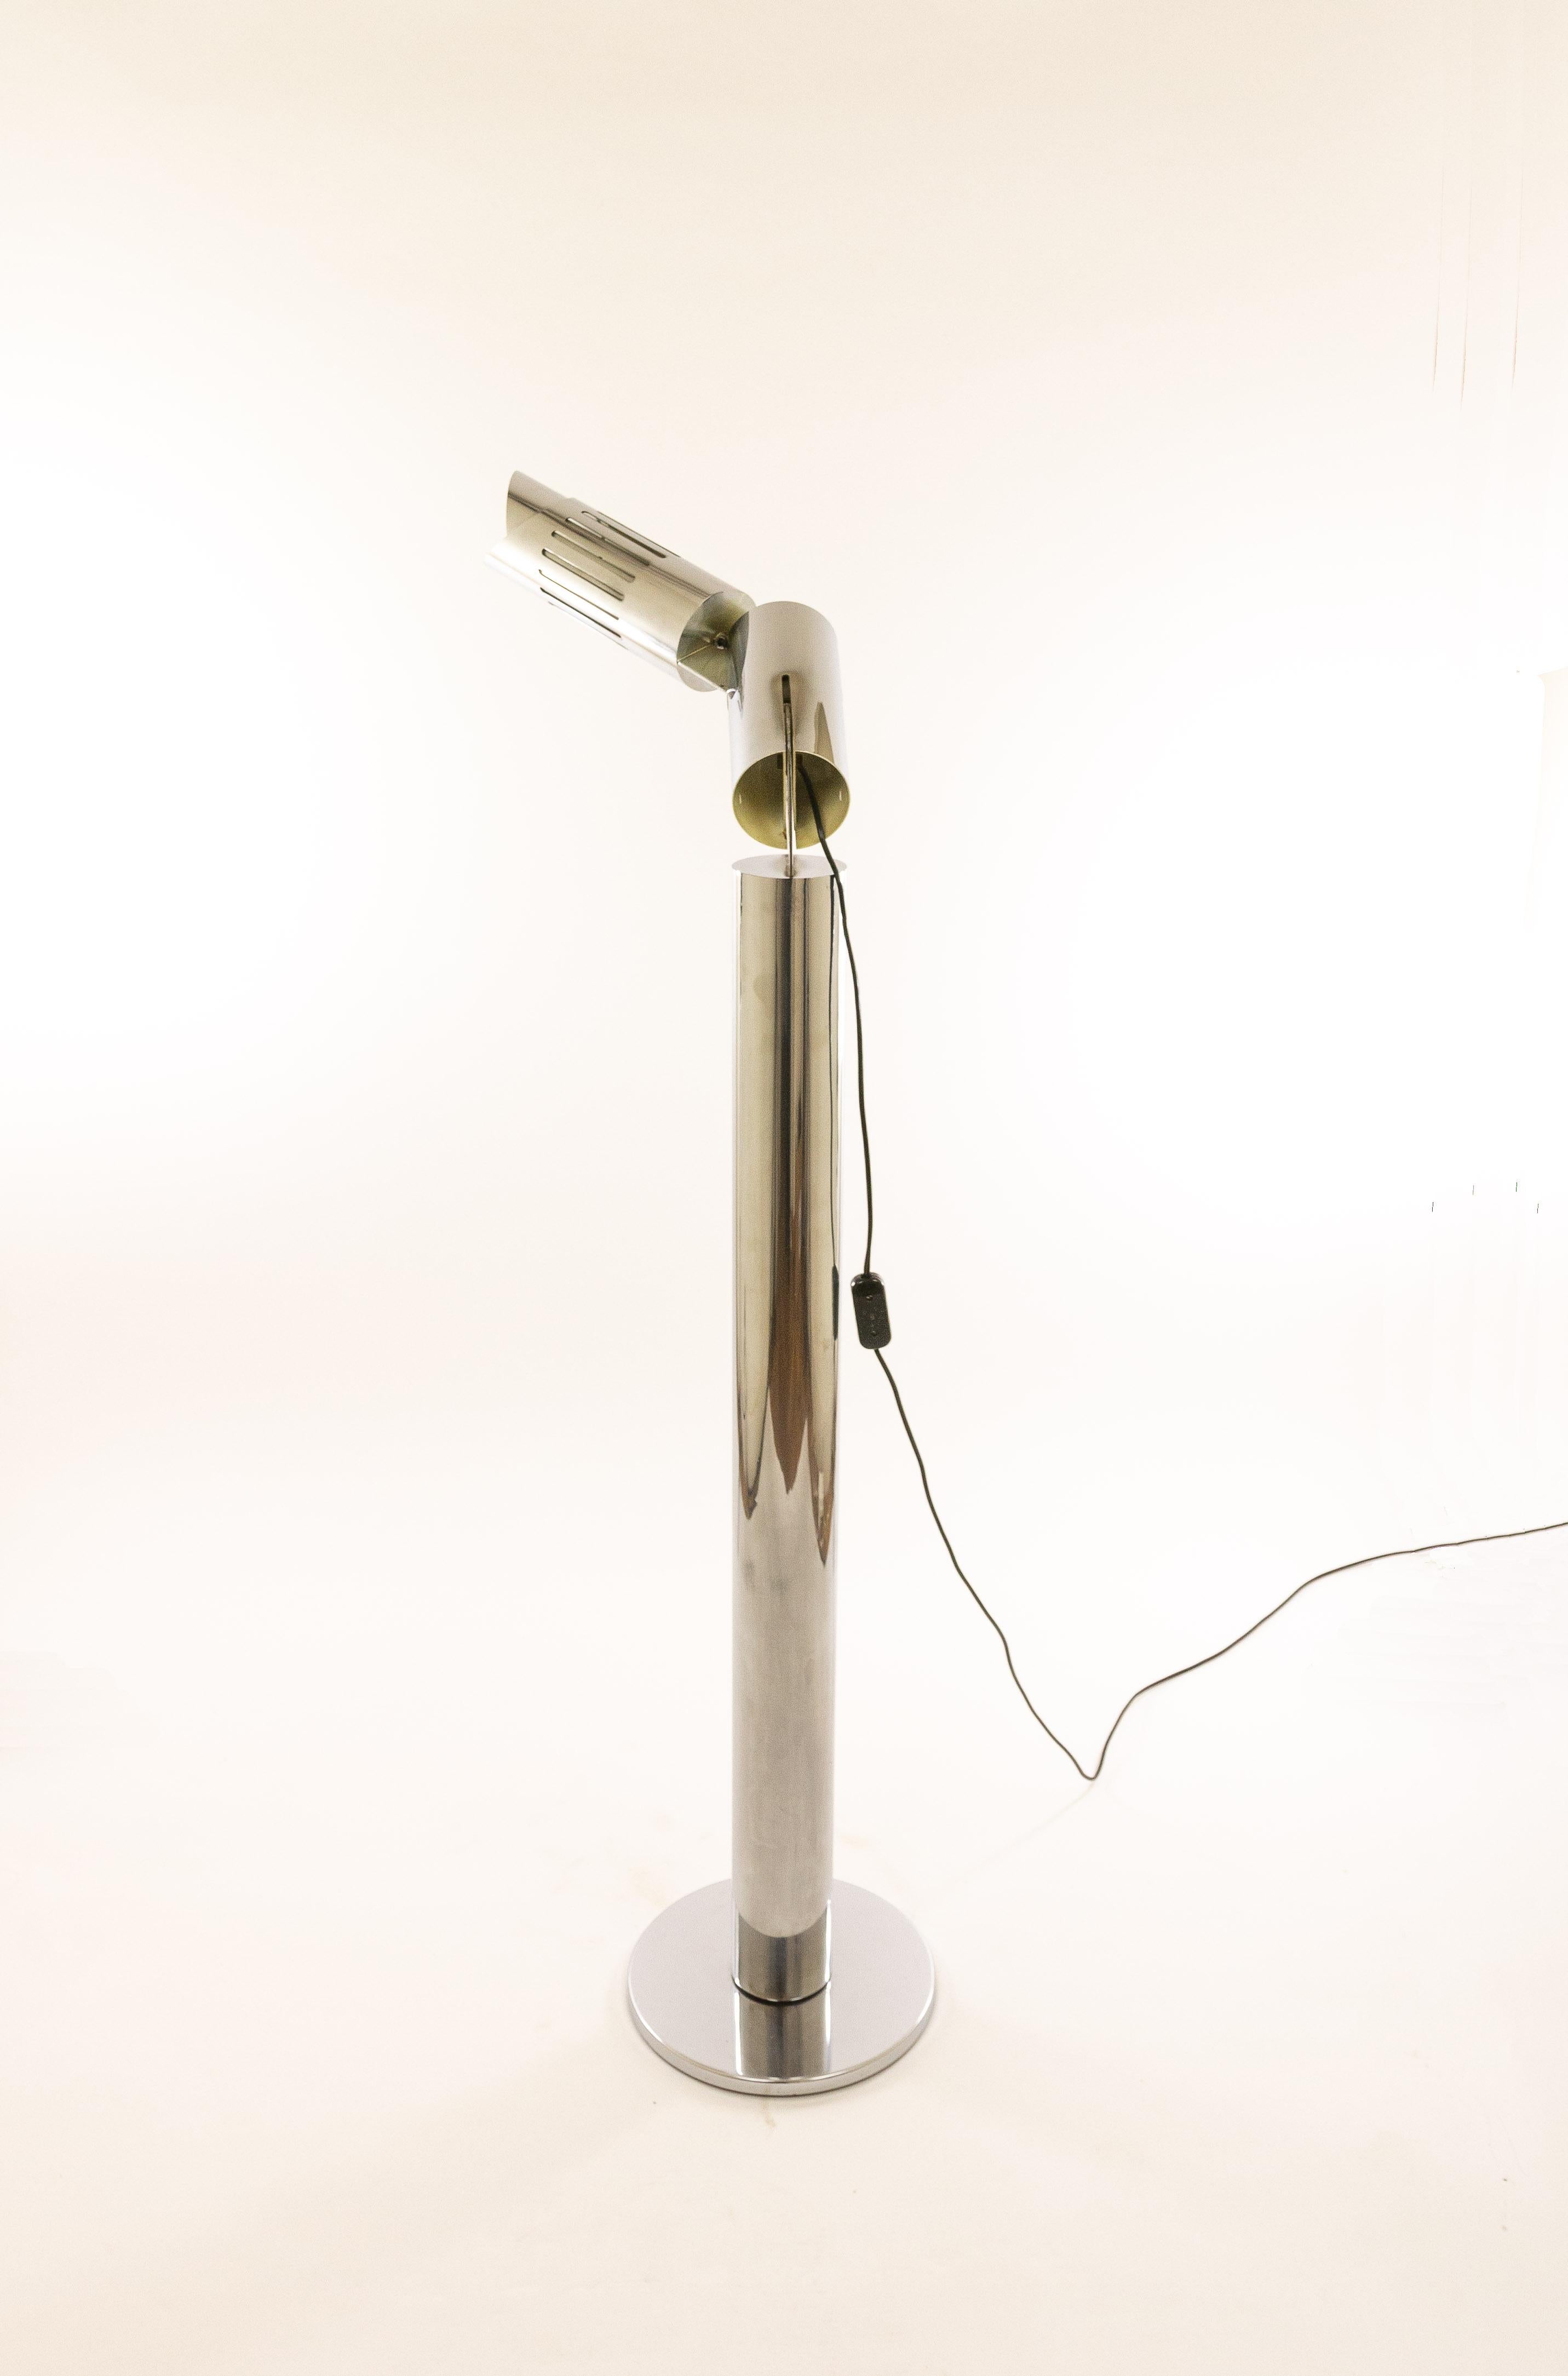 Chrome table lamp, model Cobra, designed by Gabriele D'ali in 1968 and produced by Francesconi.

This striking floor lamp can be directed in every direction as the different chrome parts are connected by metal hinges. The rather heavy floor plate